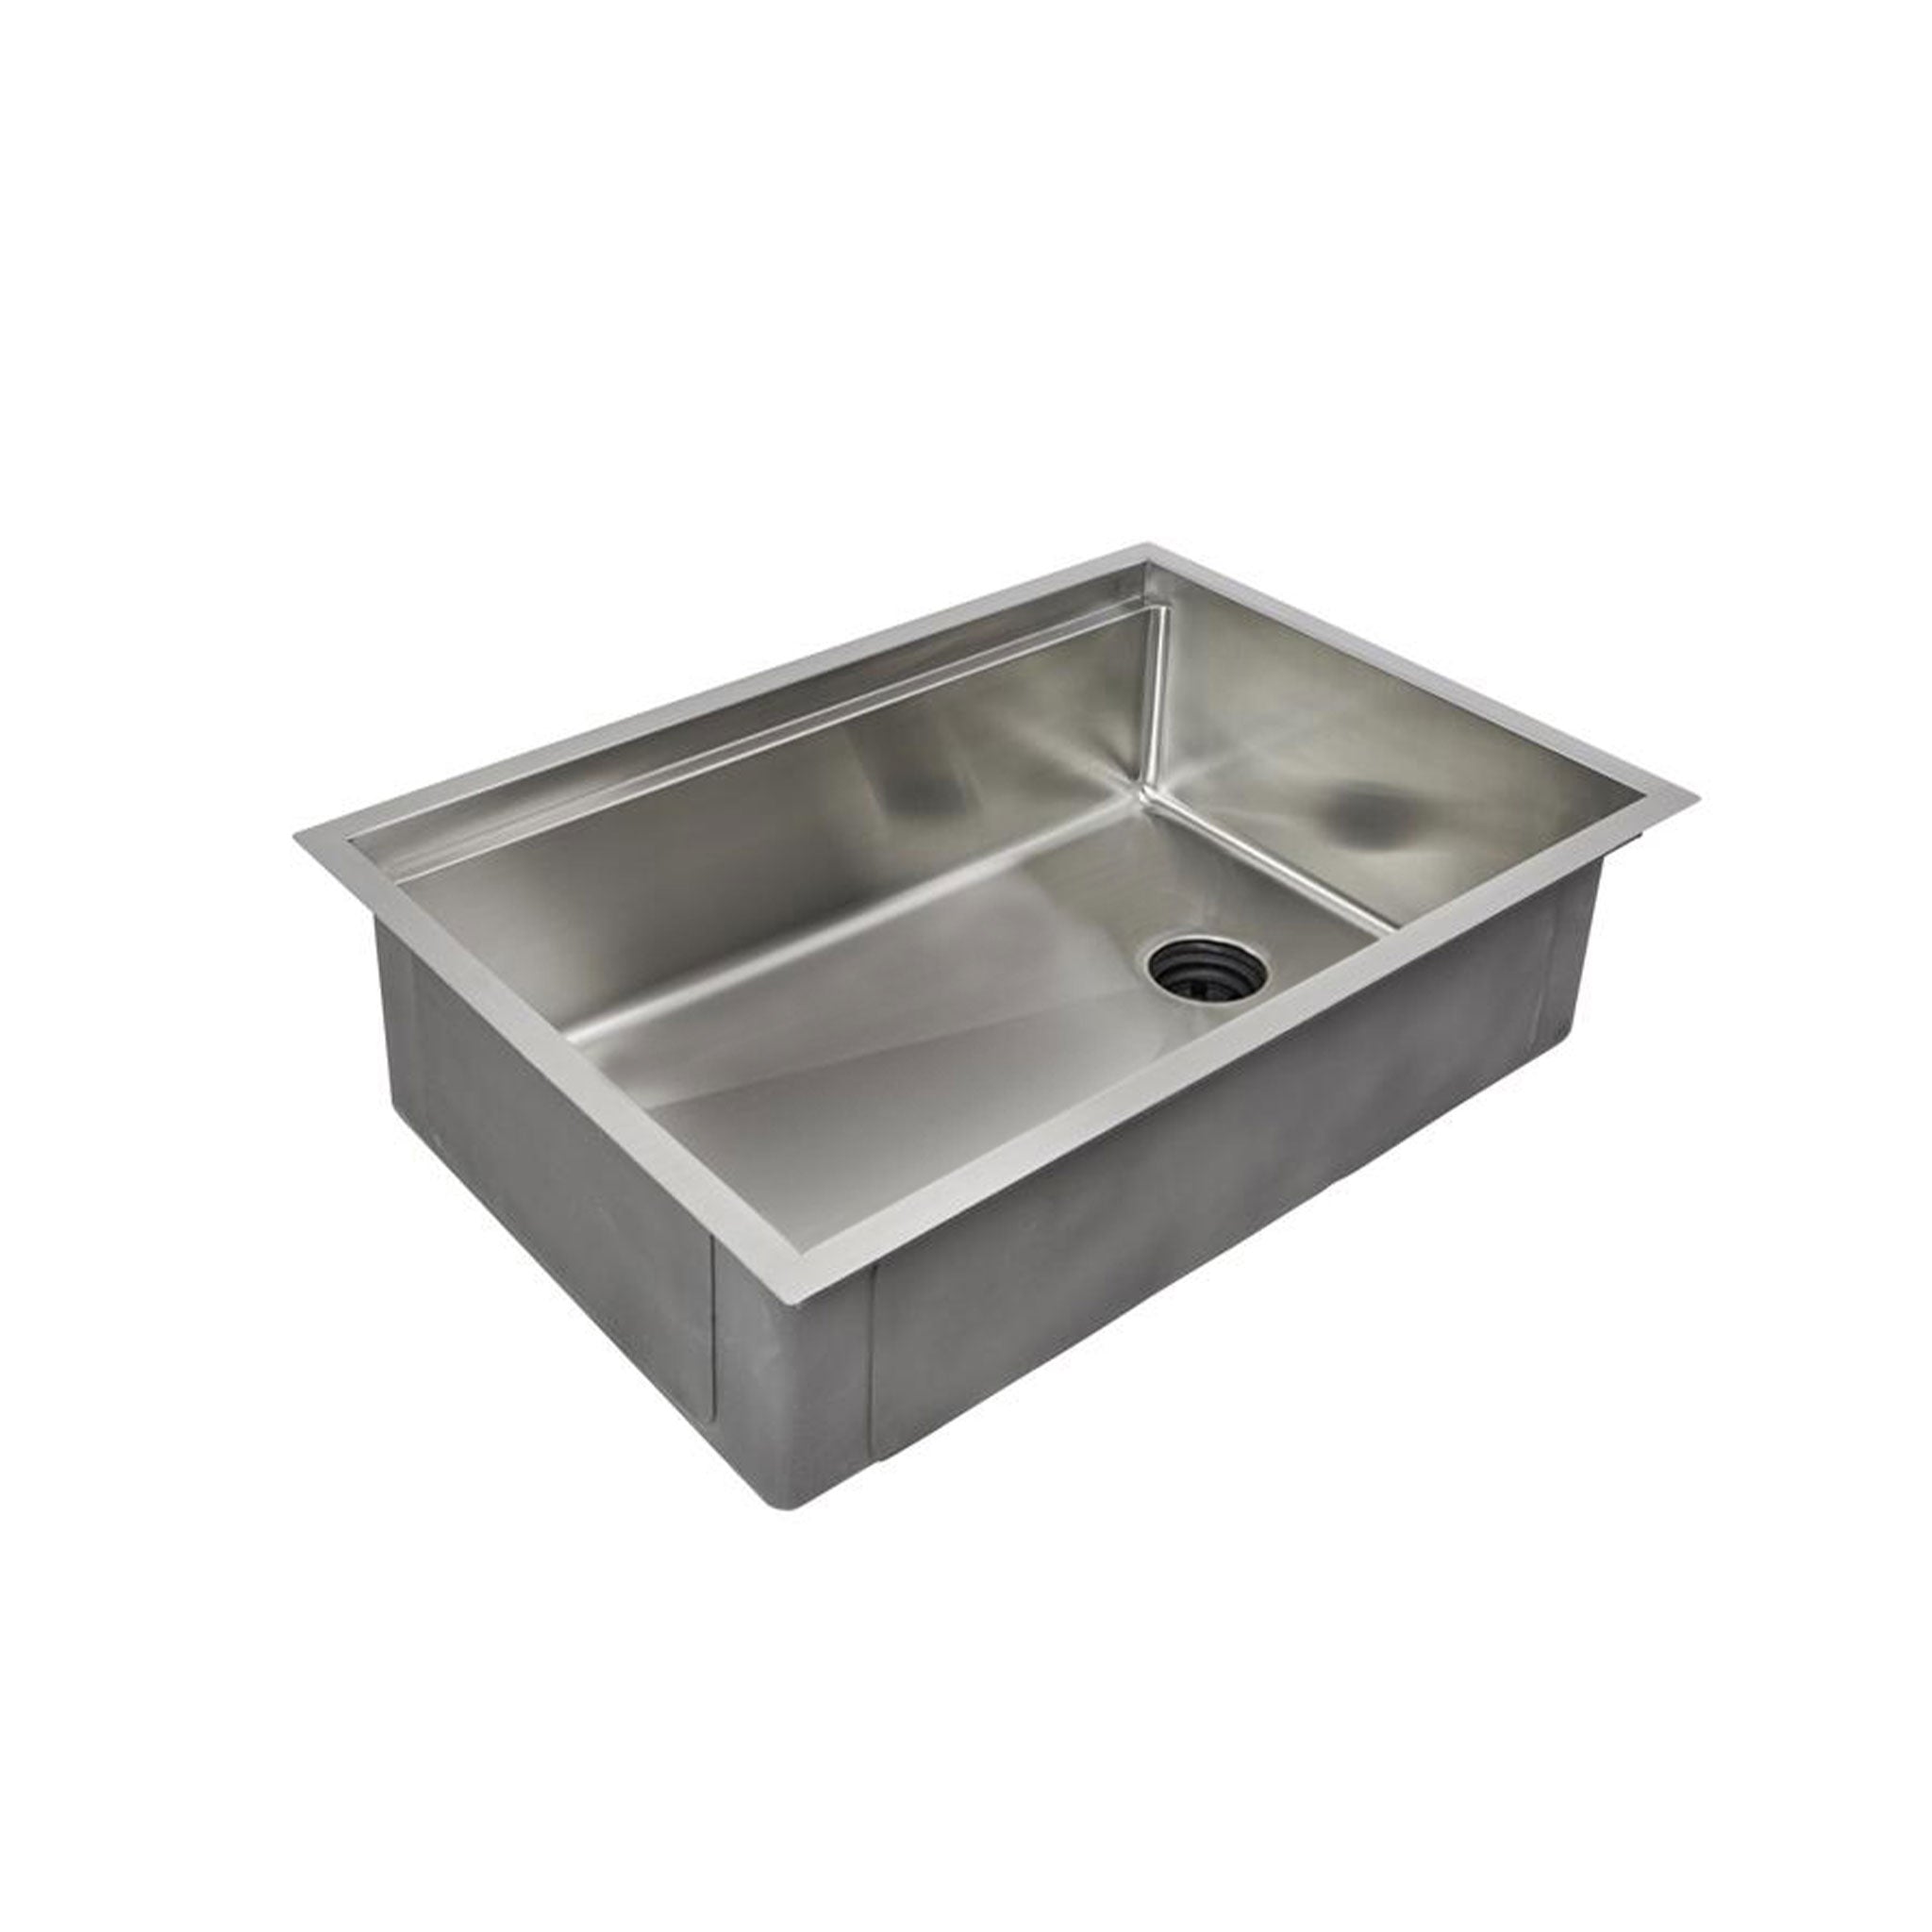 33 inch stainless steel single basin workstation sink with offset reversible drain, eight inch depth, and seamless undermount drain